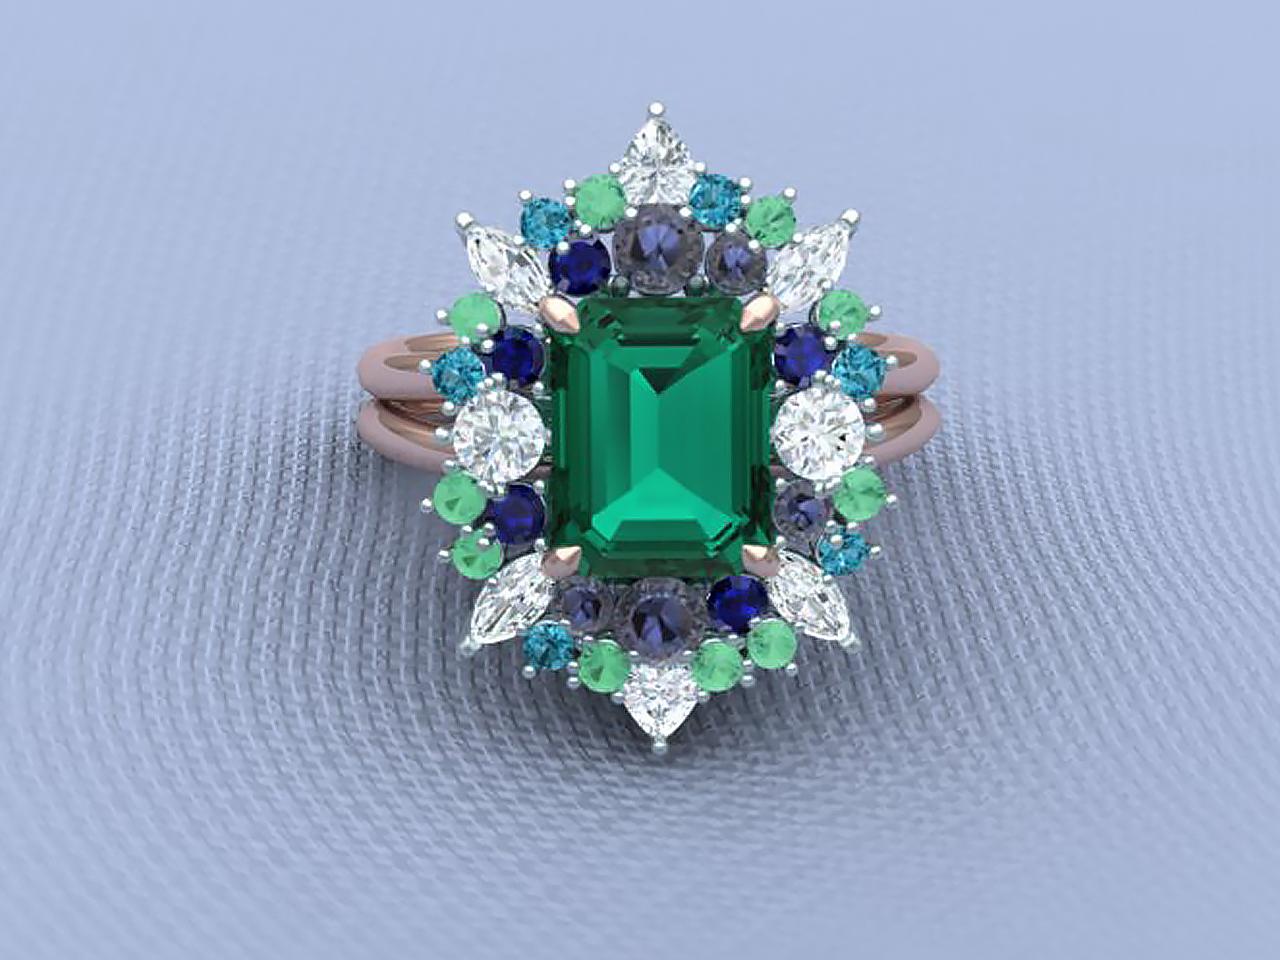 4 Carats Green Blue Tourmaline Diamond Cocktail Ring In Excellent Condition For Sale In Aliso Viejo, CA